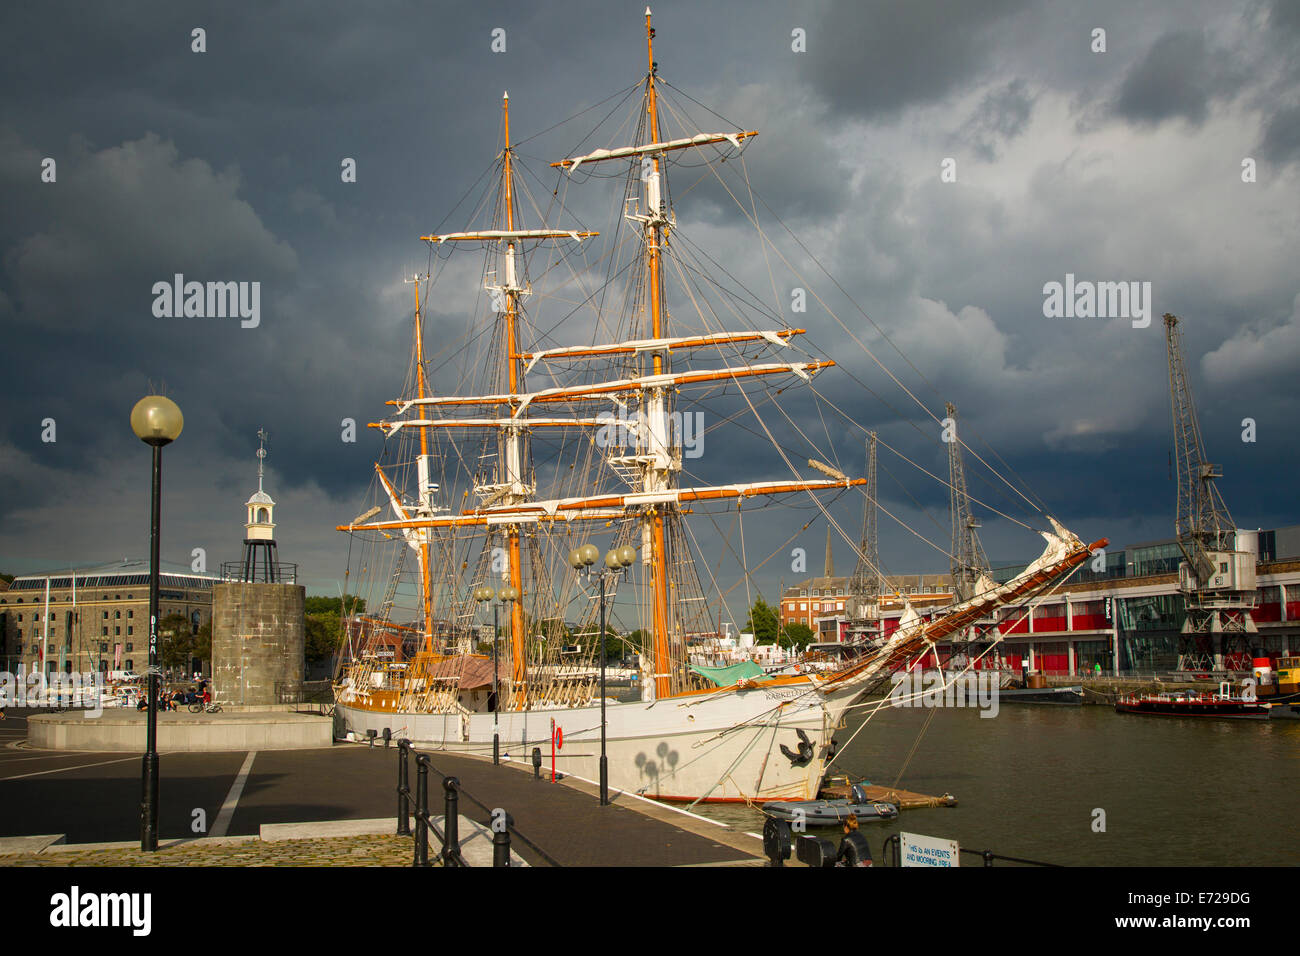 Storm clouds hover over the SS Kaskelot in the harbor at Bristol, England Stock Photo